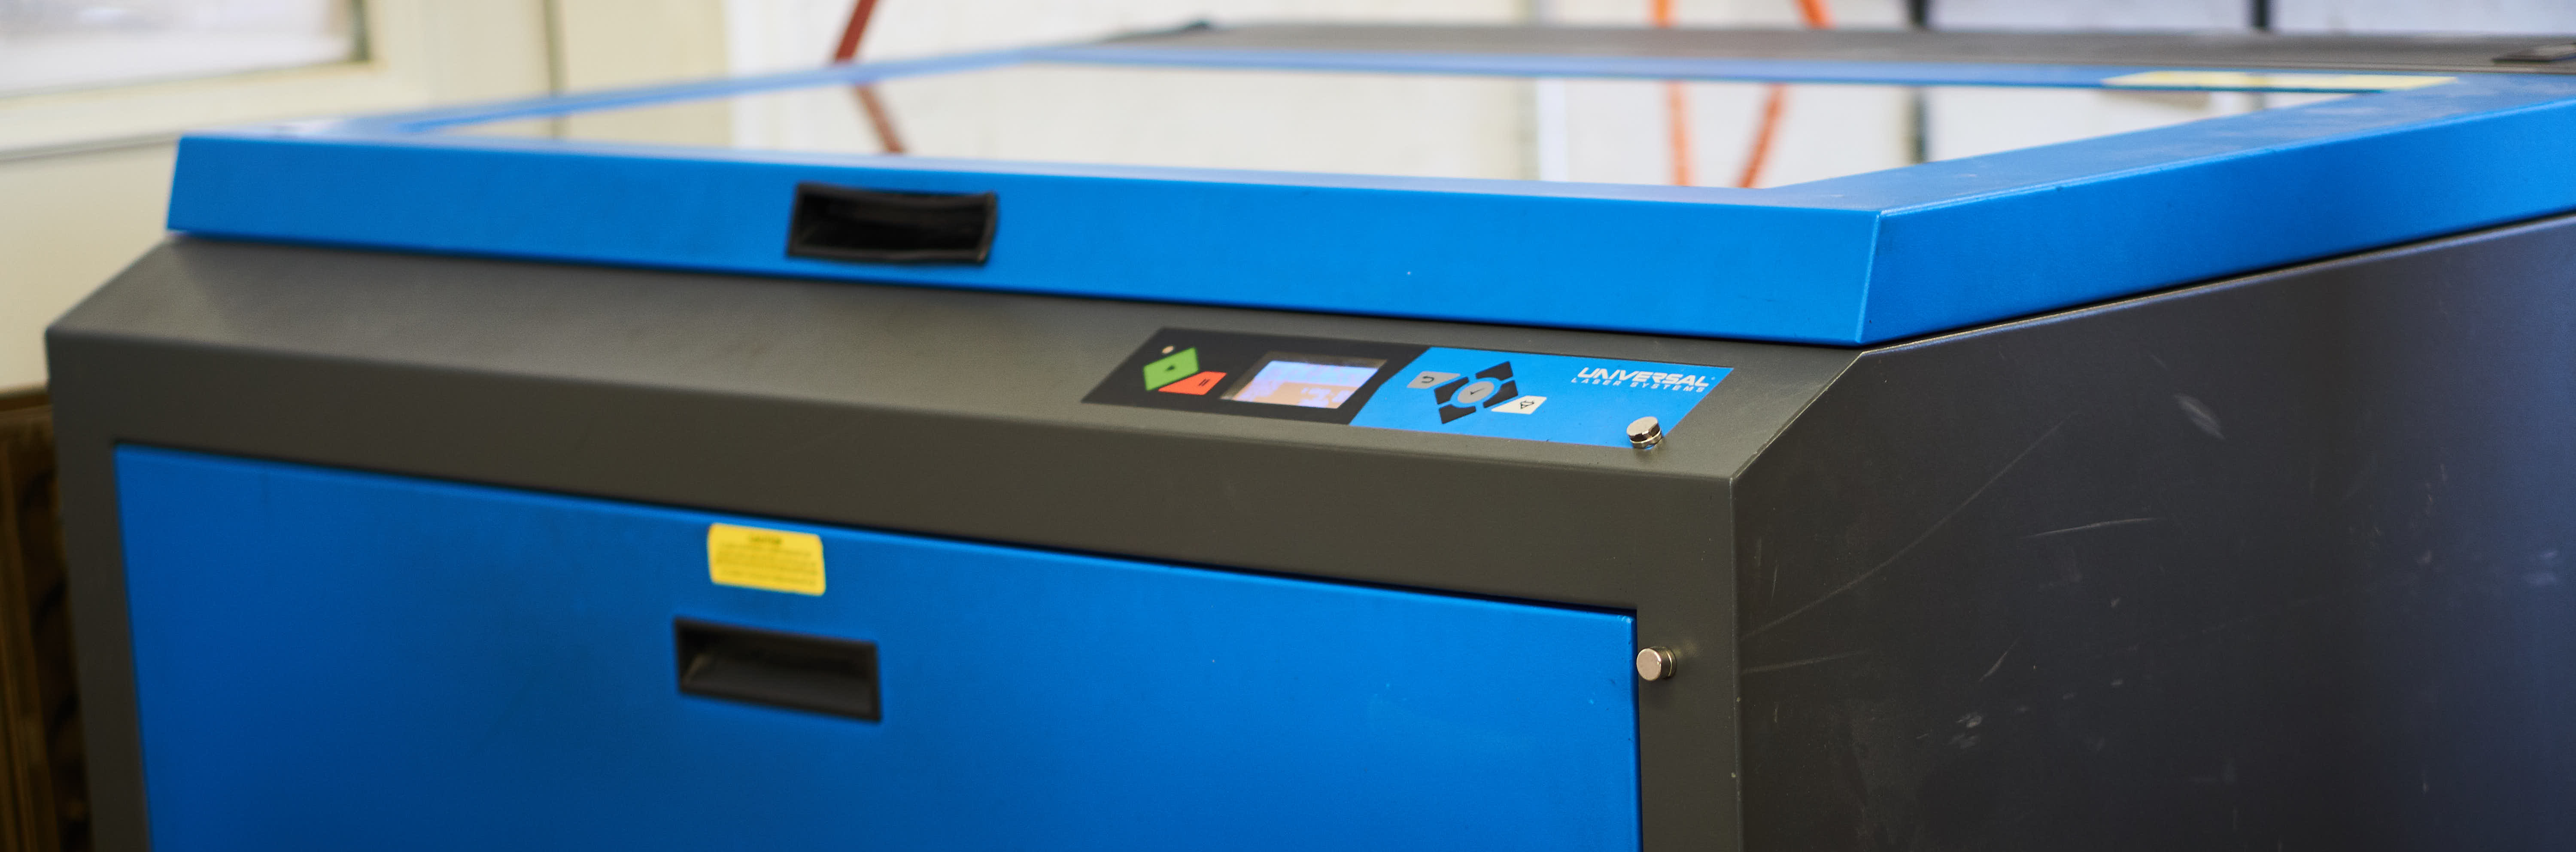 A laser cutting and engraving machine